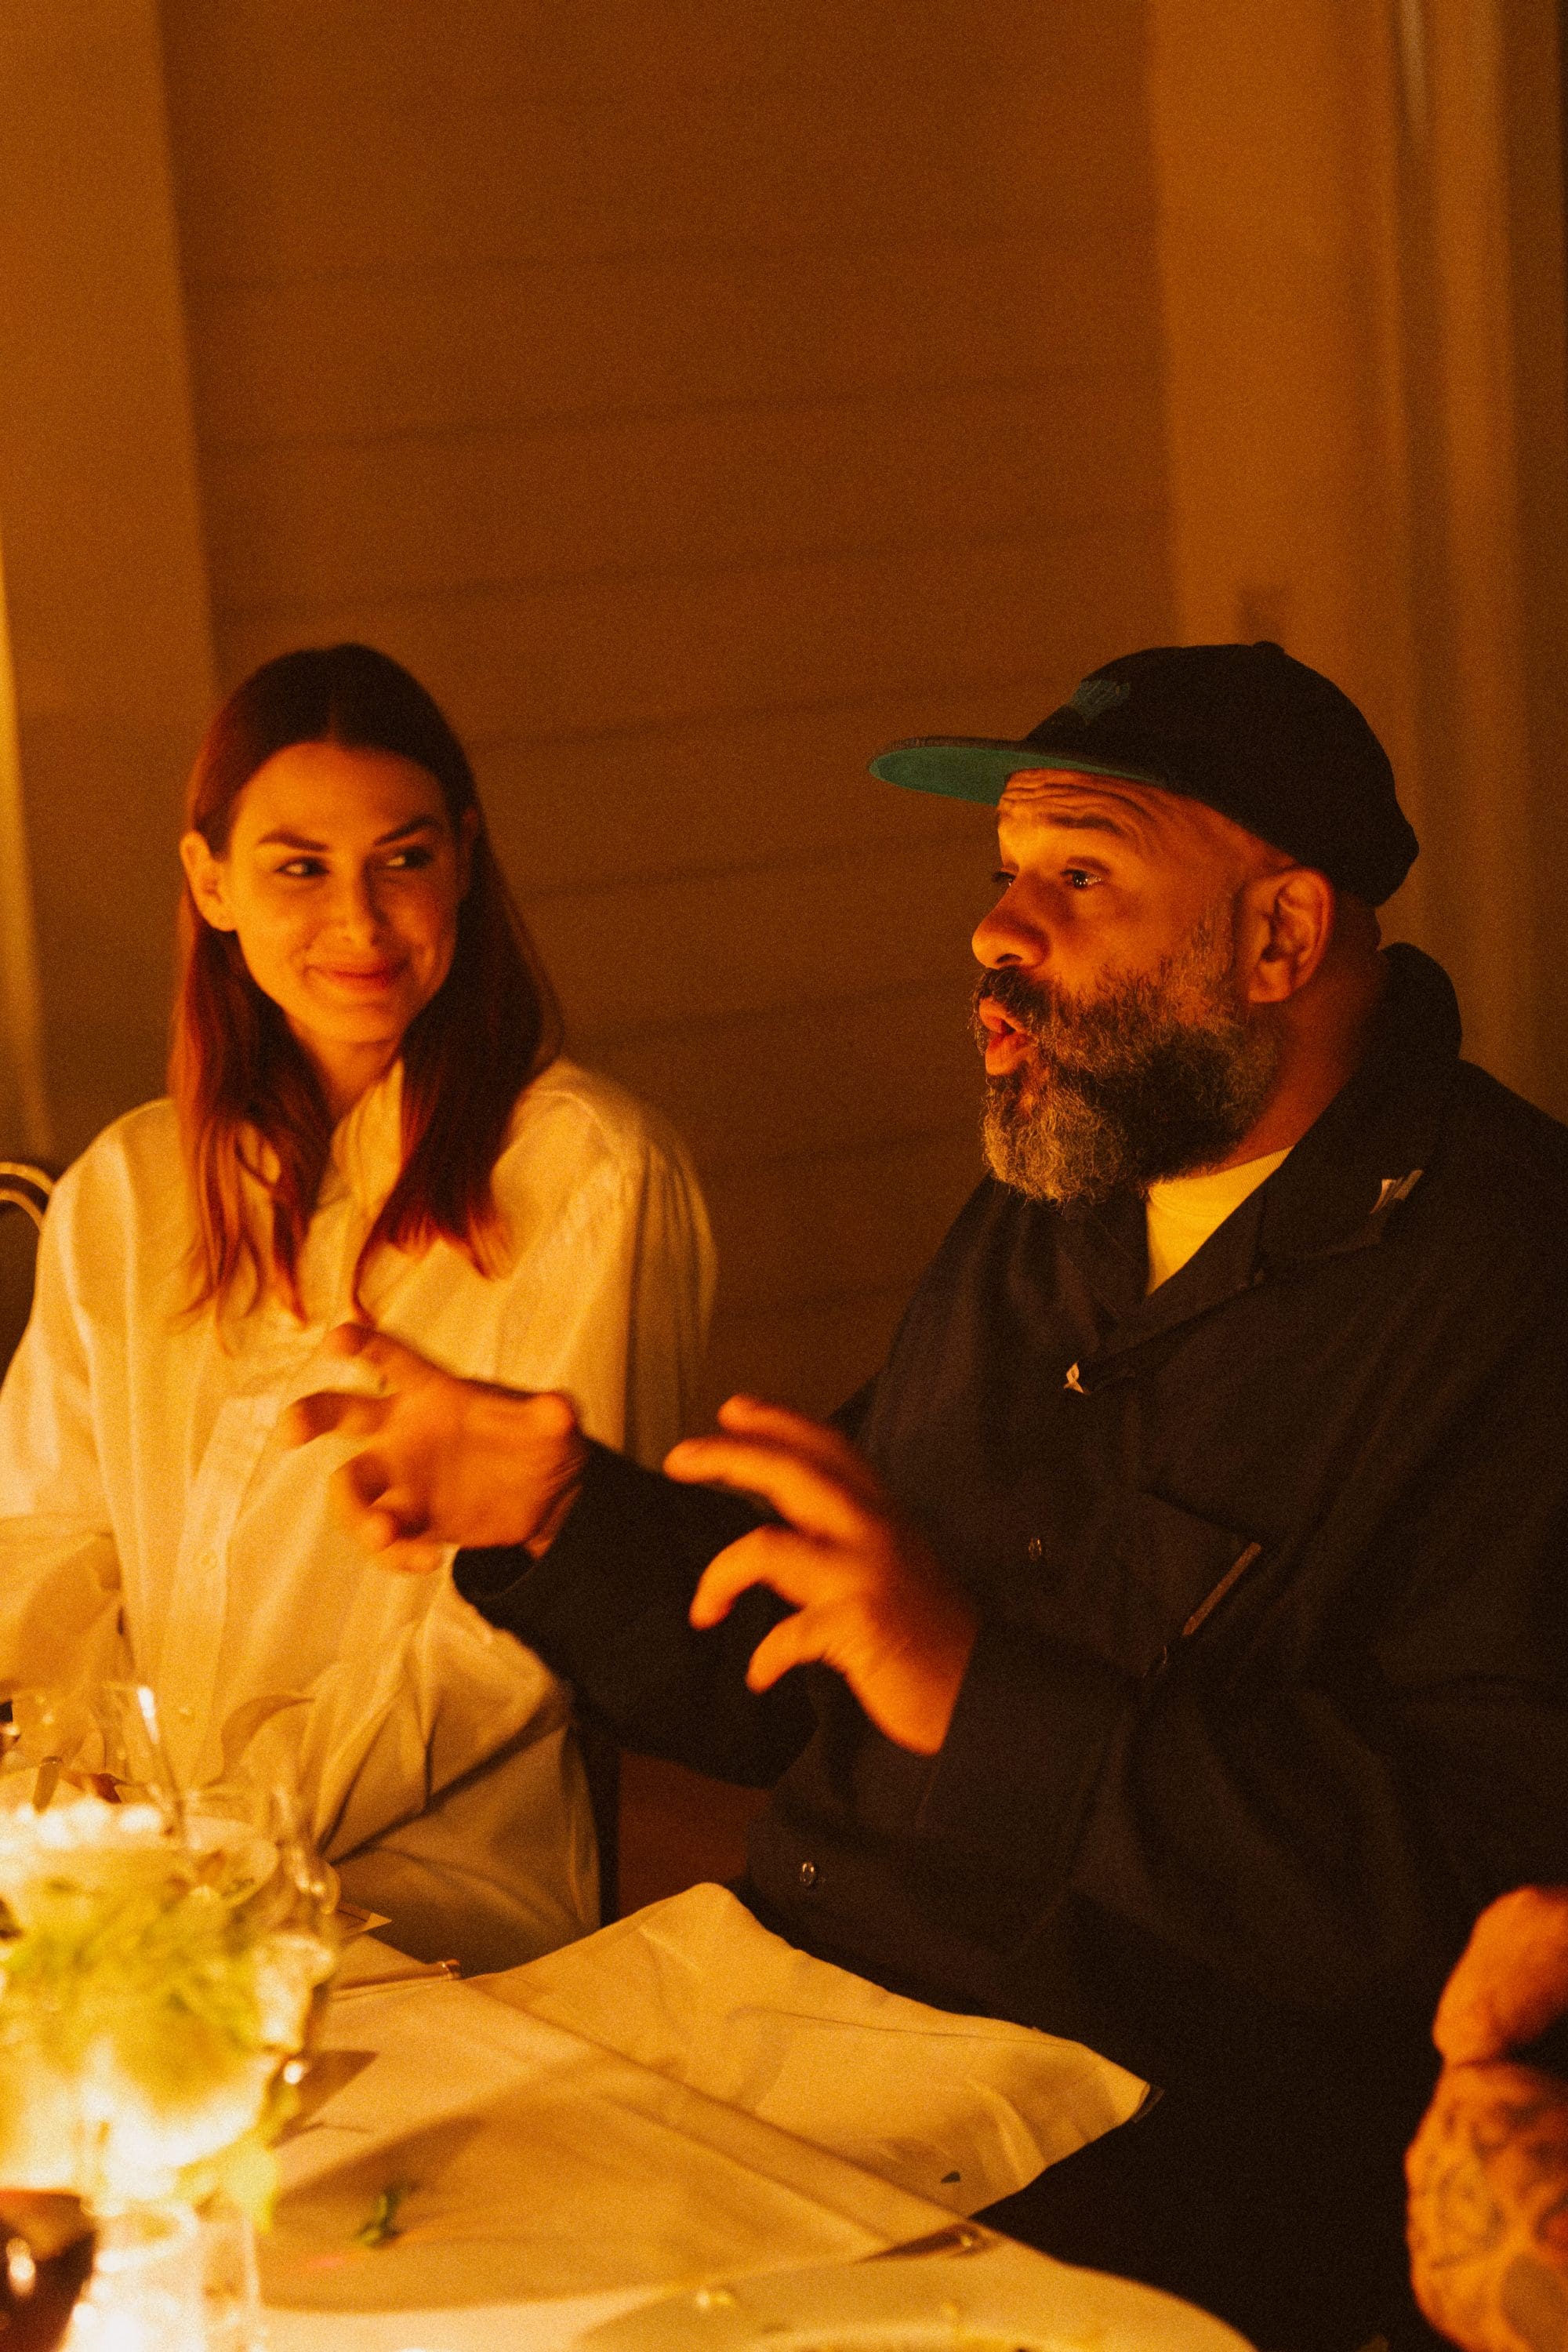 Chris Gibbs of Union LA and Joy Claire attending UNDEFEATED x G-SHOCK Friends & Family Dinner